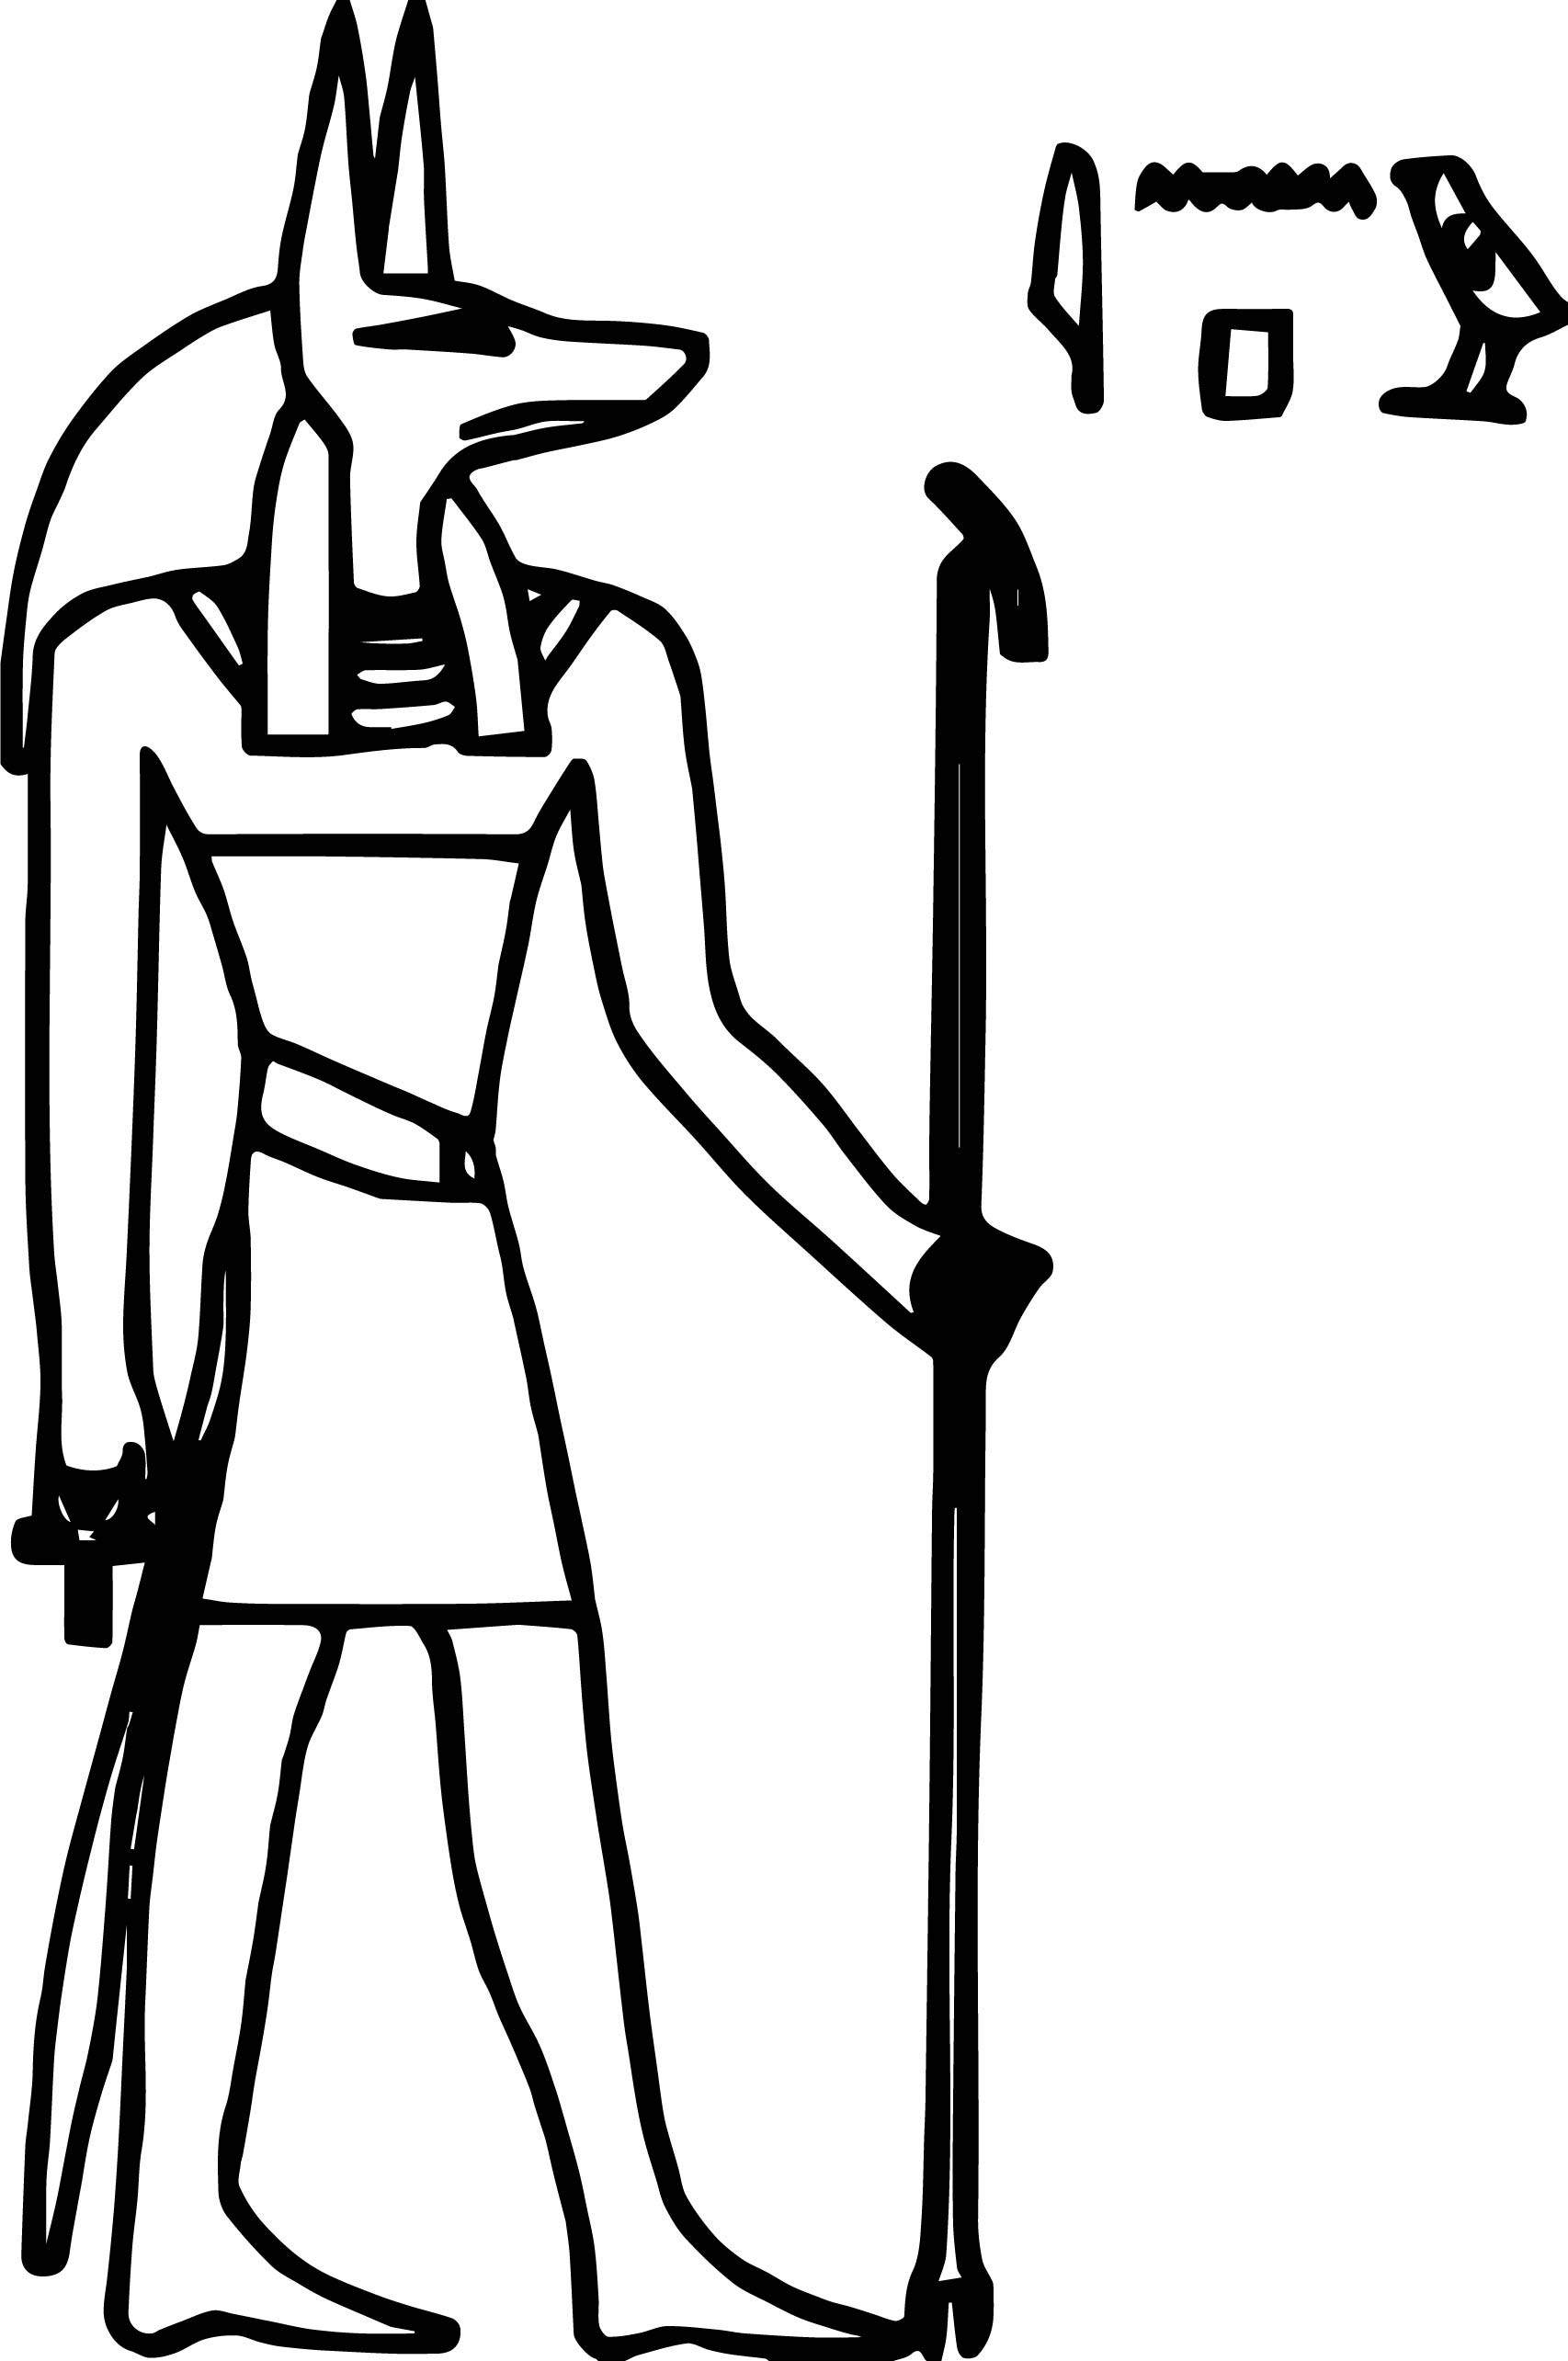 Anubis Coloring Pages.